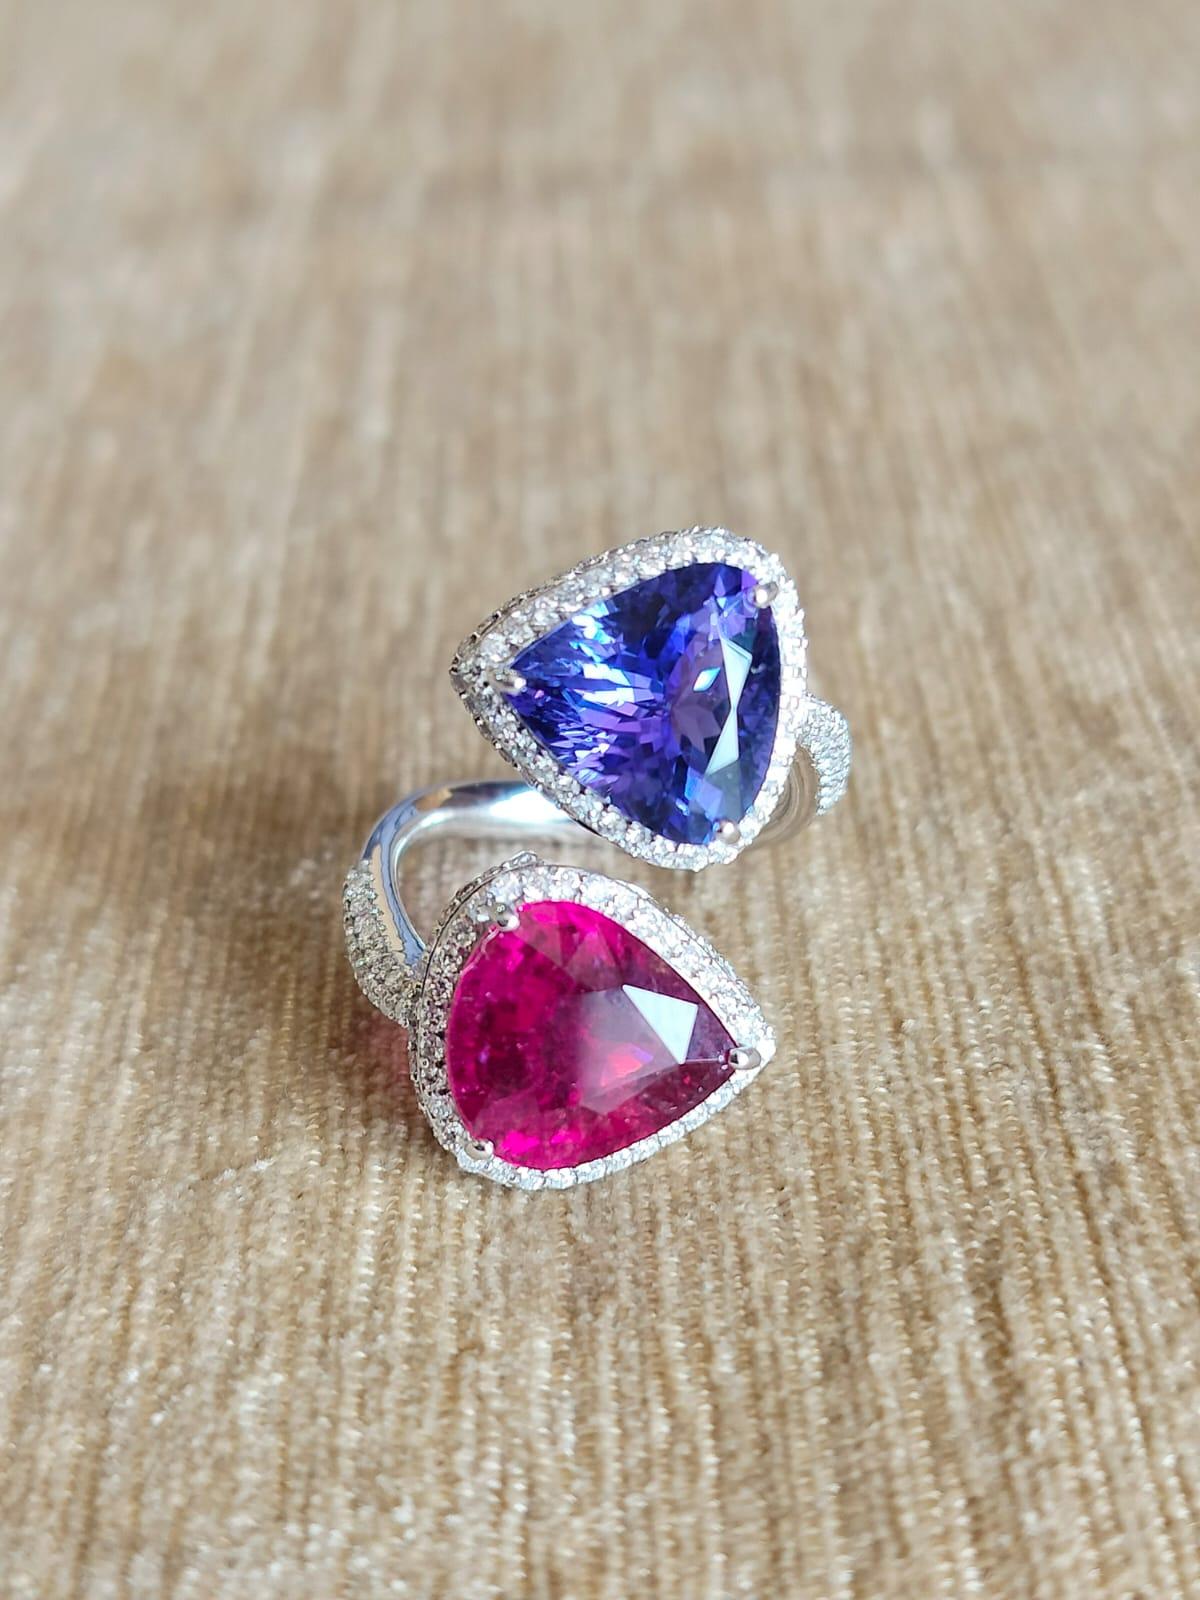 A very gorgeous and modern, Tanzanite and Rubellite Engagement Ring set in 18K Gold & Diamonds. The weight of the Tanzanite is 4.66 carats. The Tanzanite is responsibly sourced from Tanzania. The weight of the Rubellite is 5.03 carats. The Diamonds